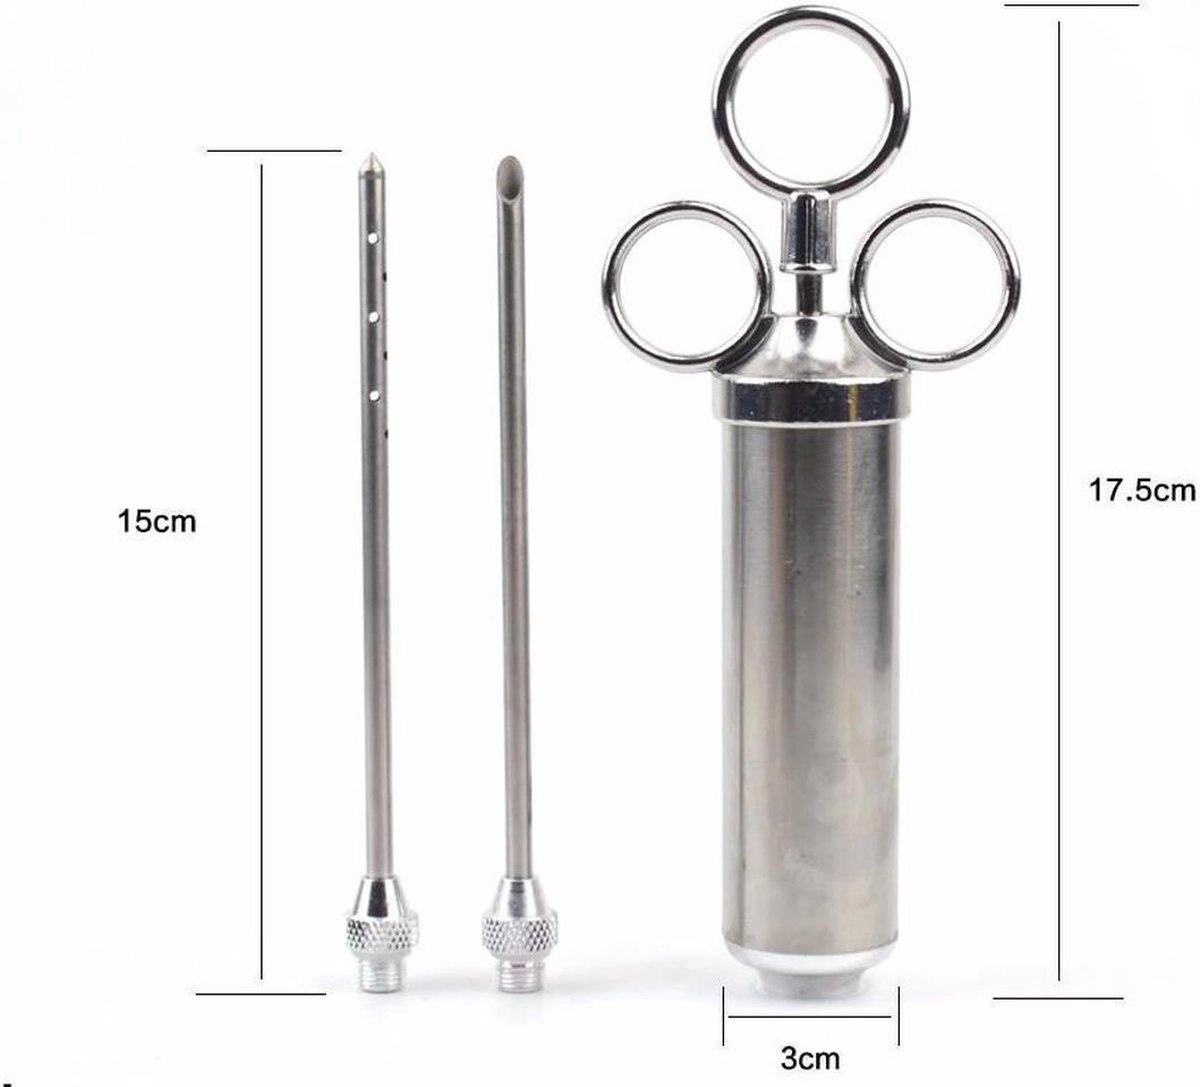 SFT Products RVS Marinade Injector | BBQ Vlees Spuit Injecteur | Meat Injector | Marinade Injectiespuit | Vlees Injectie Spuit | Barbecue Vlees Injector| RVS Marinade injector XXL